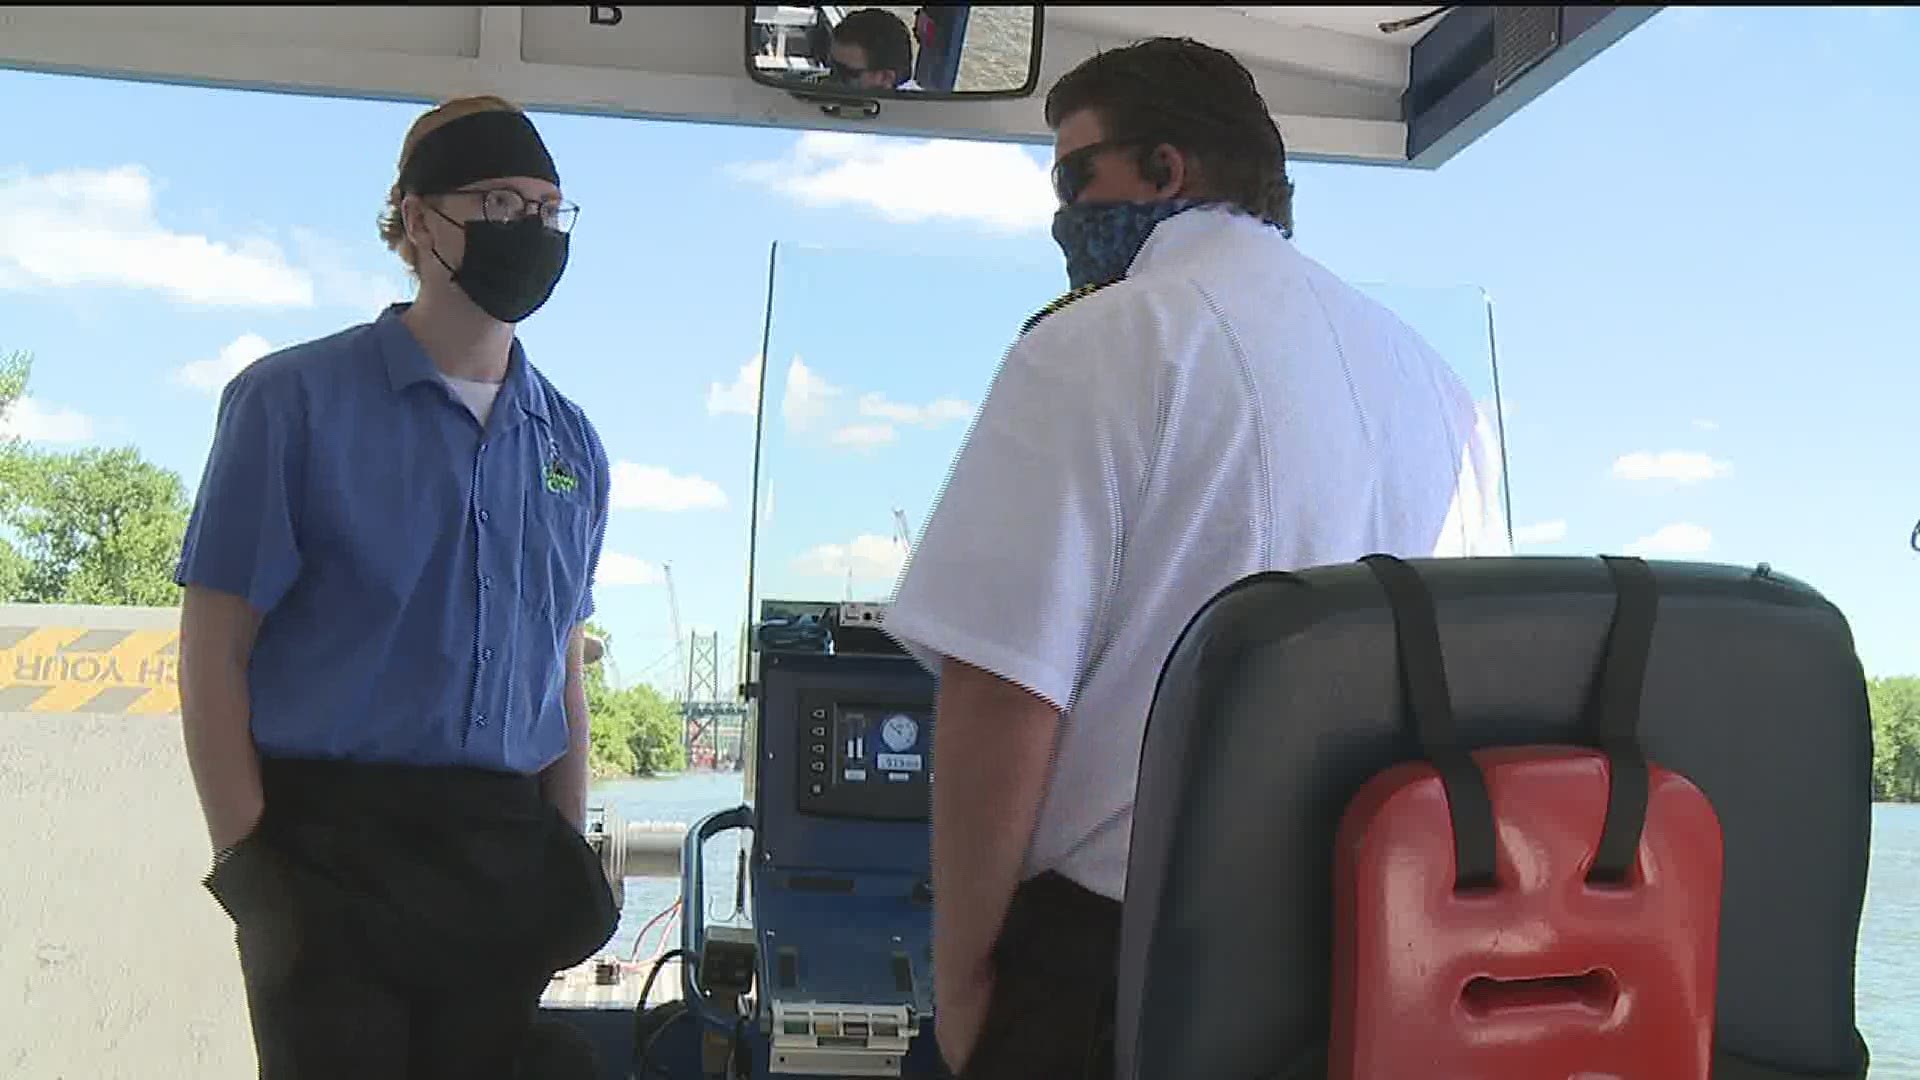 The water taxi service is operating at half-capacity and riders are encouraged to wear face masks.